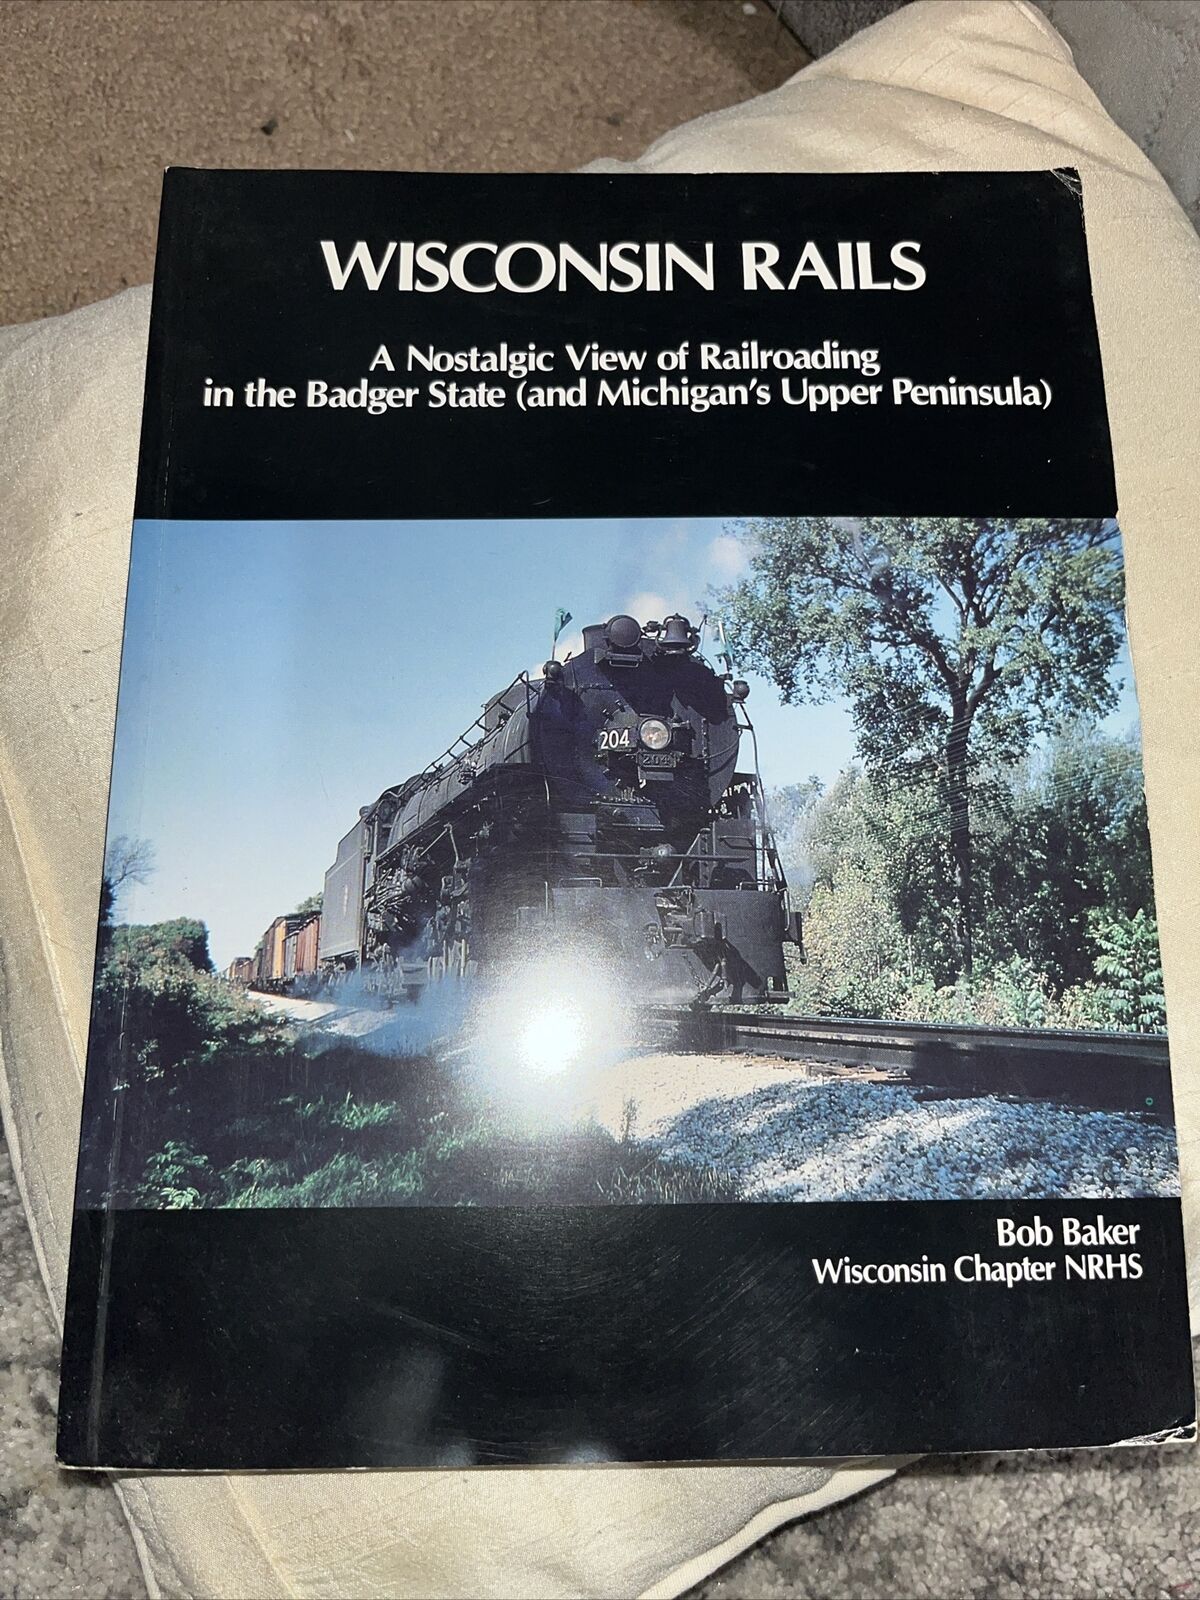 Wisconsin Rails by Bob Baker a nostalgic view of railroading in the Badger State